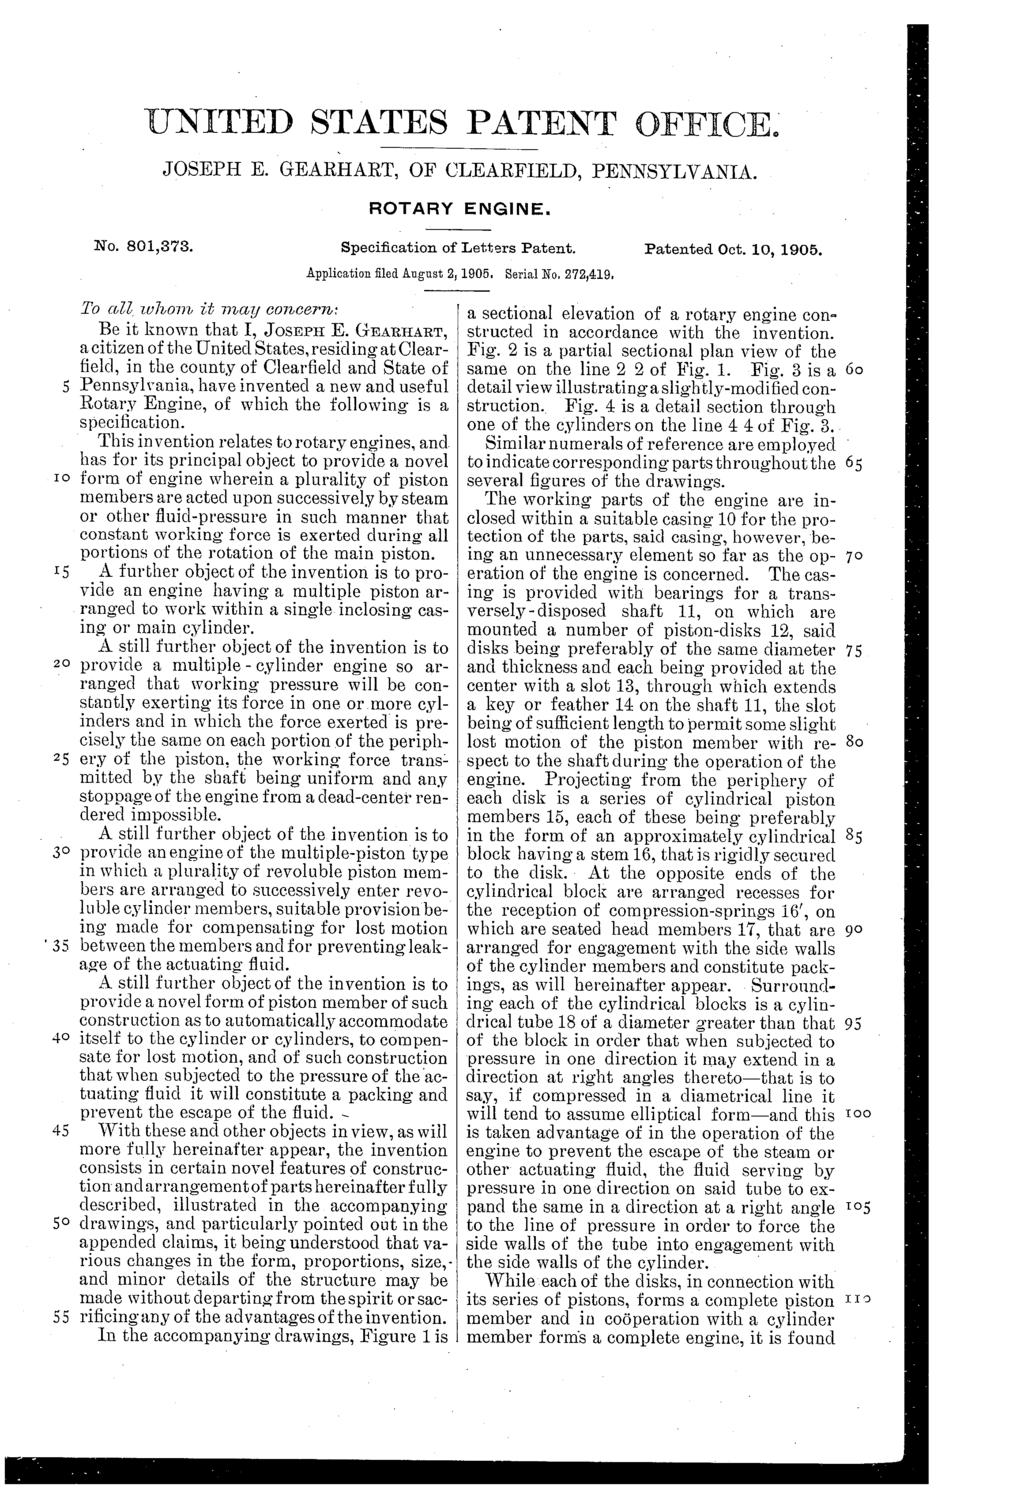 IO 25 45 UNITED STATES PATENT OFFICE. JOSEPH E. GEARHART, OF CLEARFIELD, PENNSYLVANIA. ROTARY ENGINE. No. 801,373. Specification of Letters Patent. Patented Oct. 10, 1905.